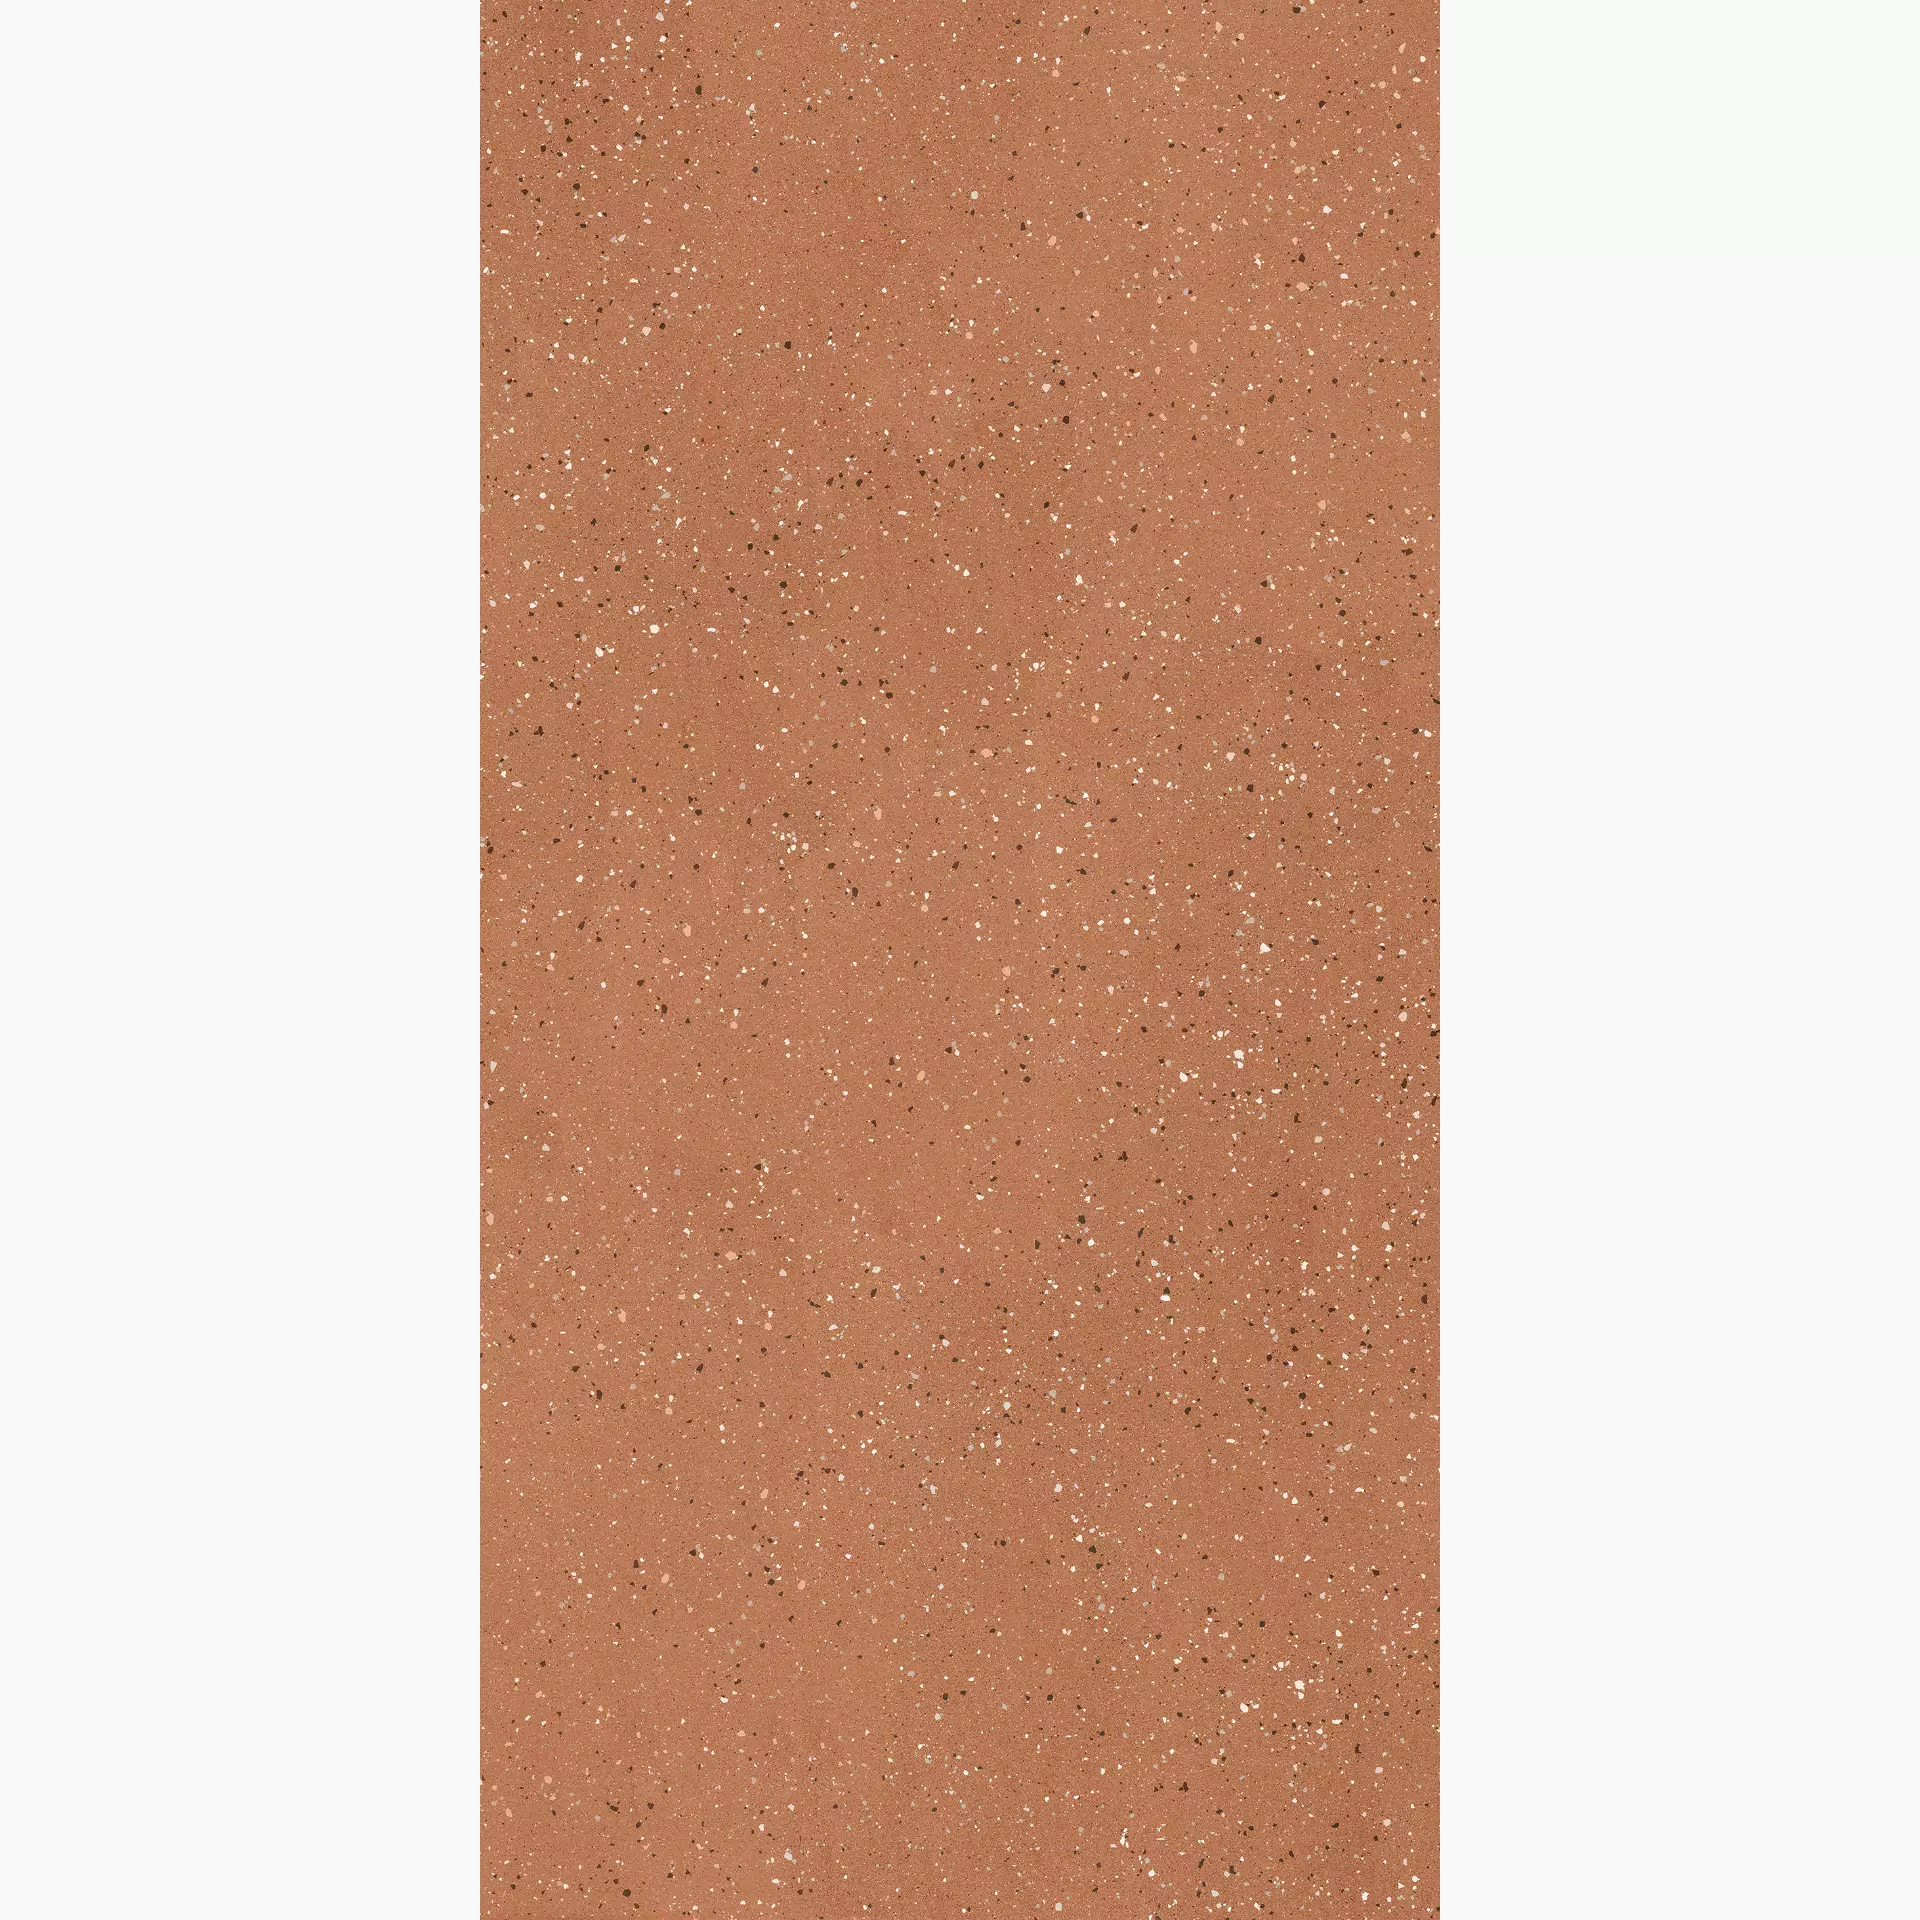 Florim Earthtech Outback_Flakes Glossy - Bright 776924 120x240cm rectified 9mm